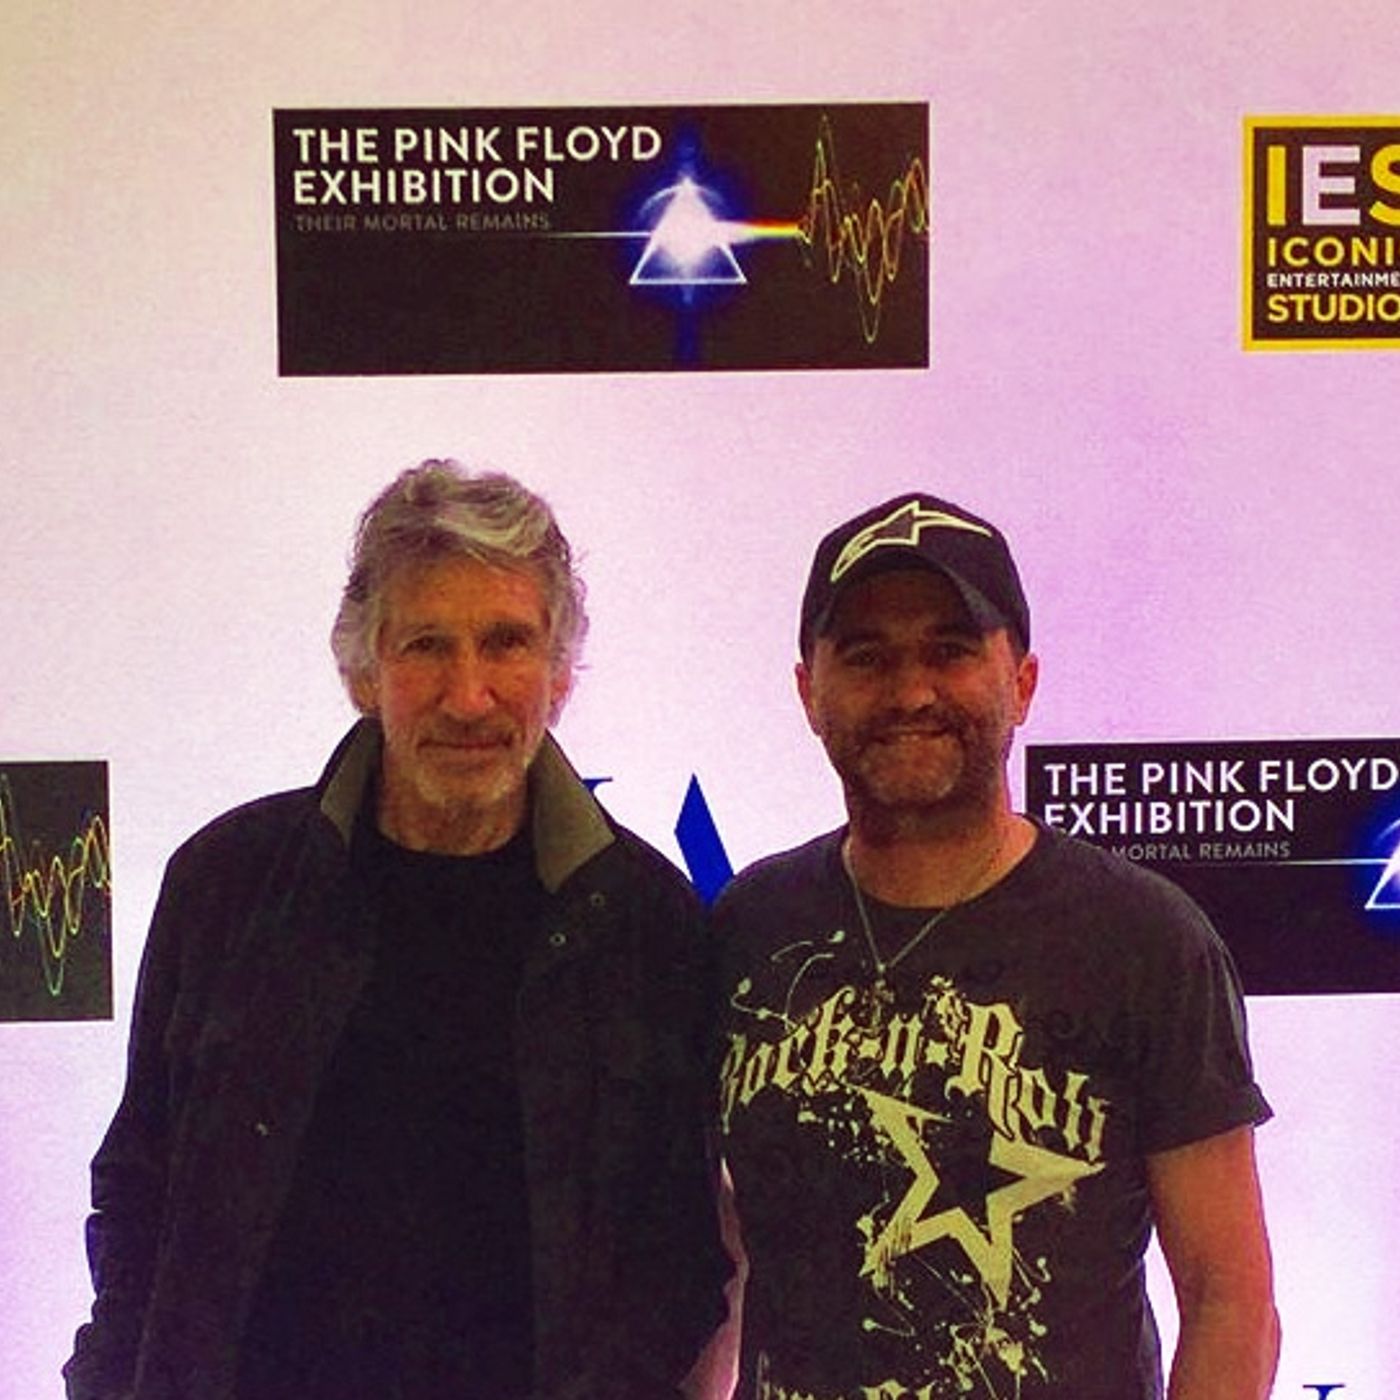 Roger Waters talks about The Pink Floyd Exhibition 'Their Mortal Remains'